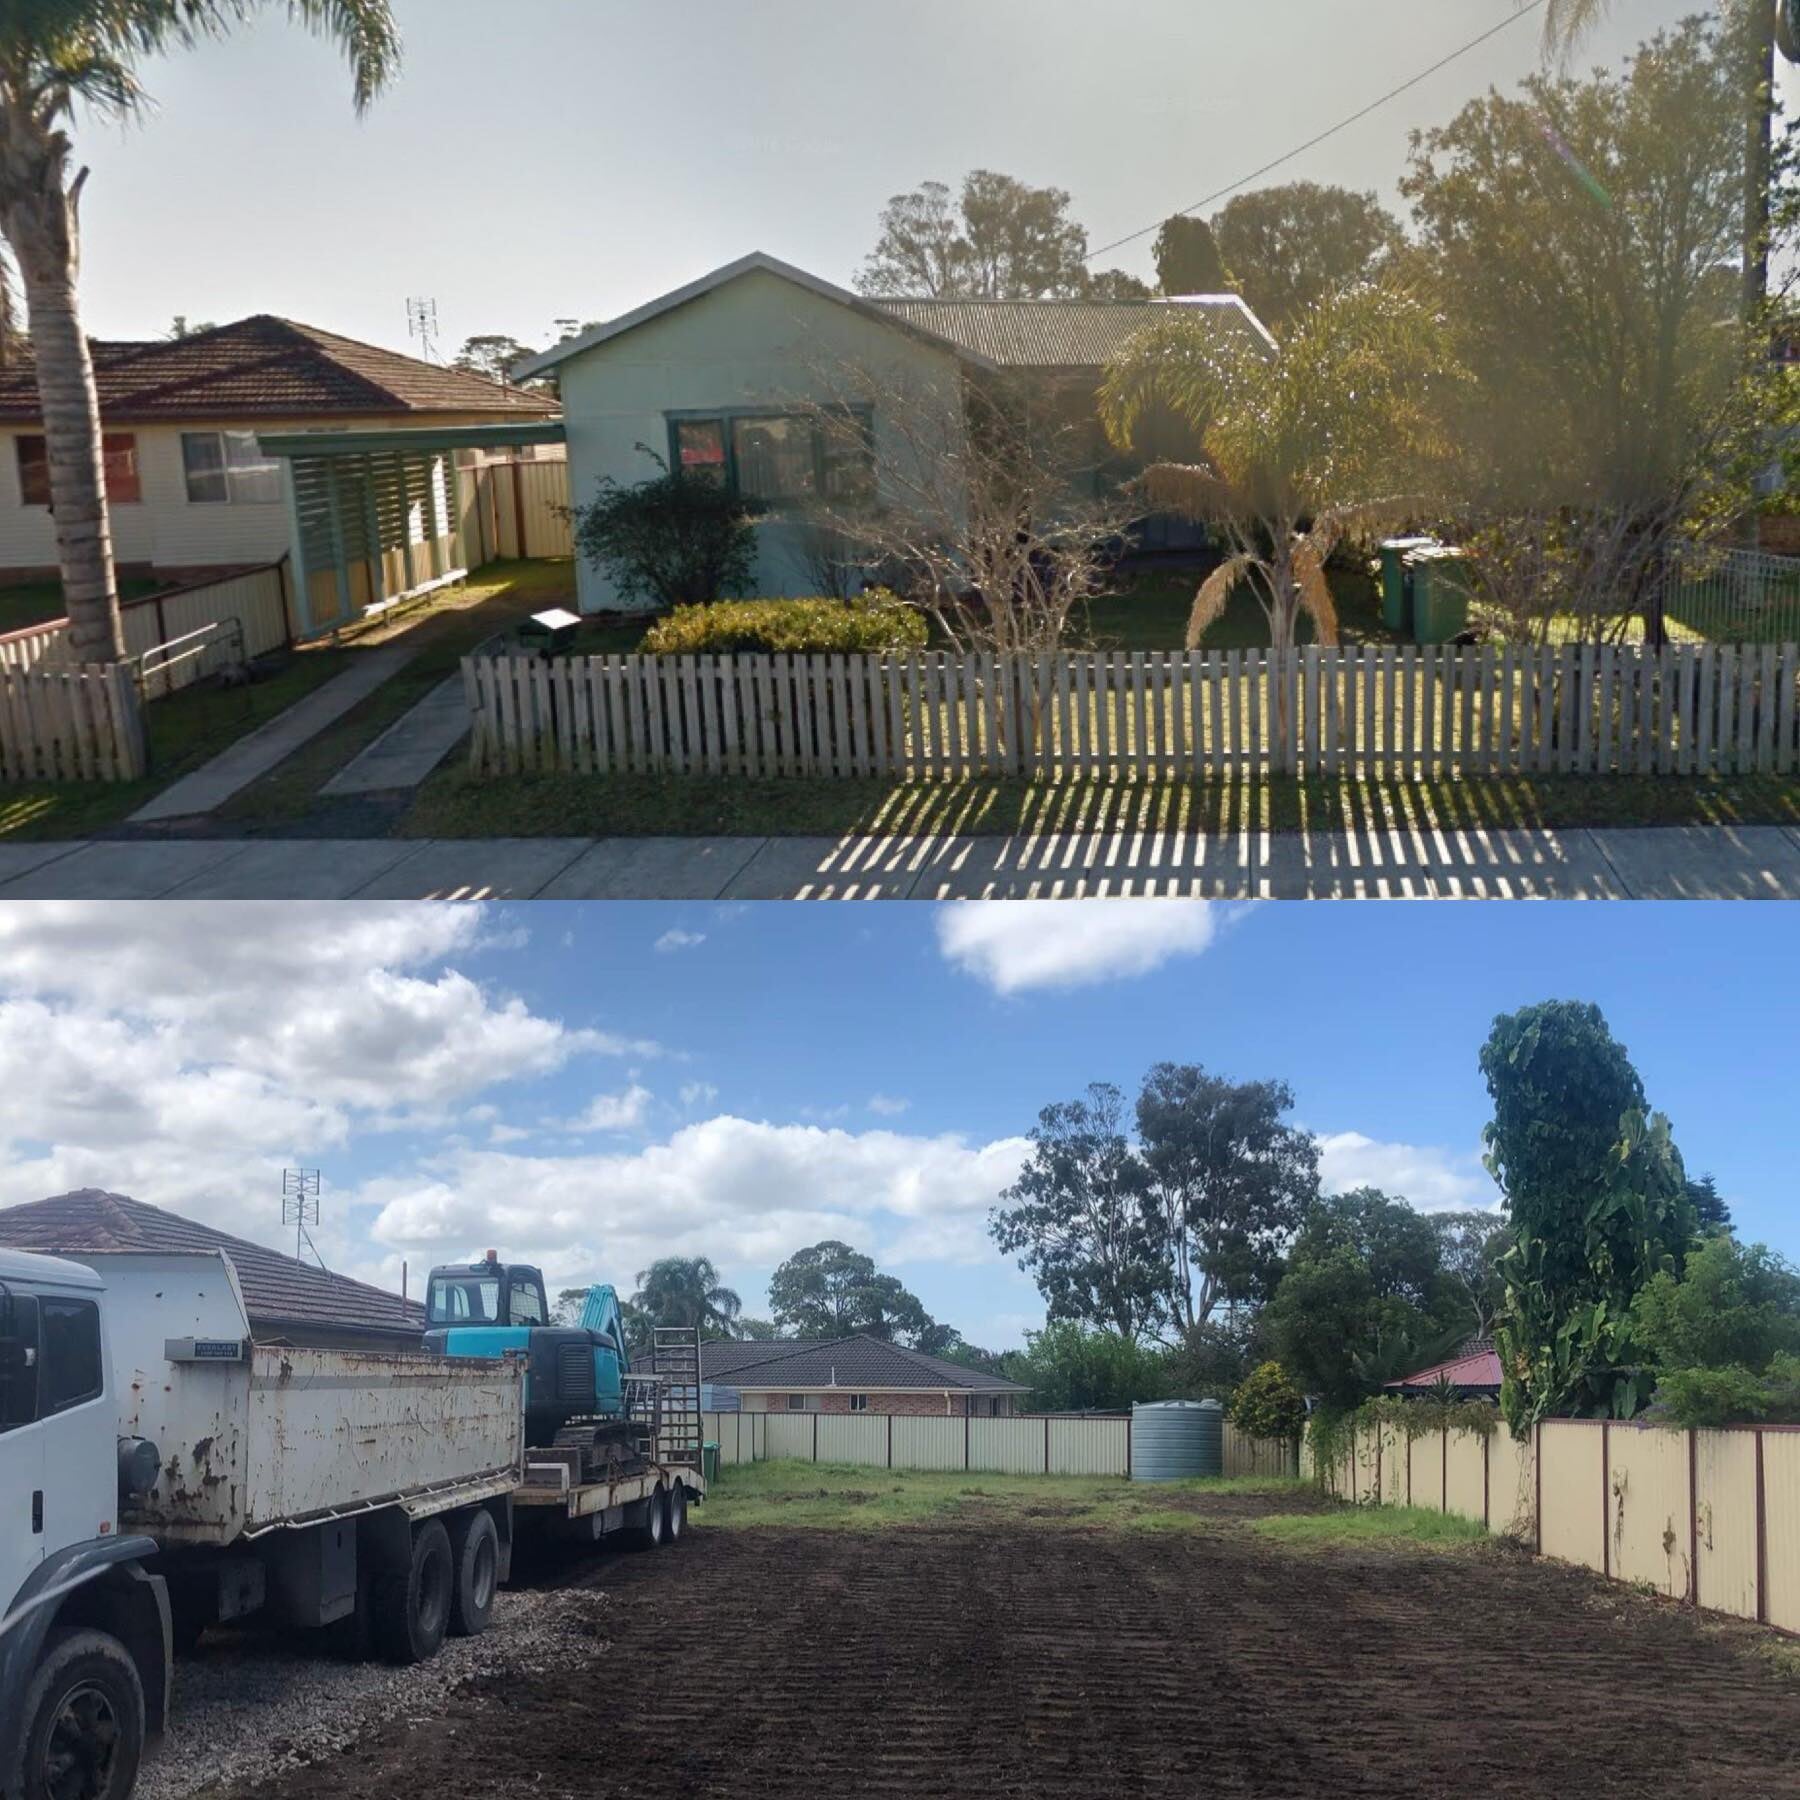 Before and After Residential Demolition - demolition contractors Central Coast